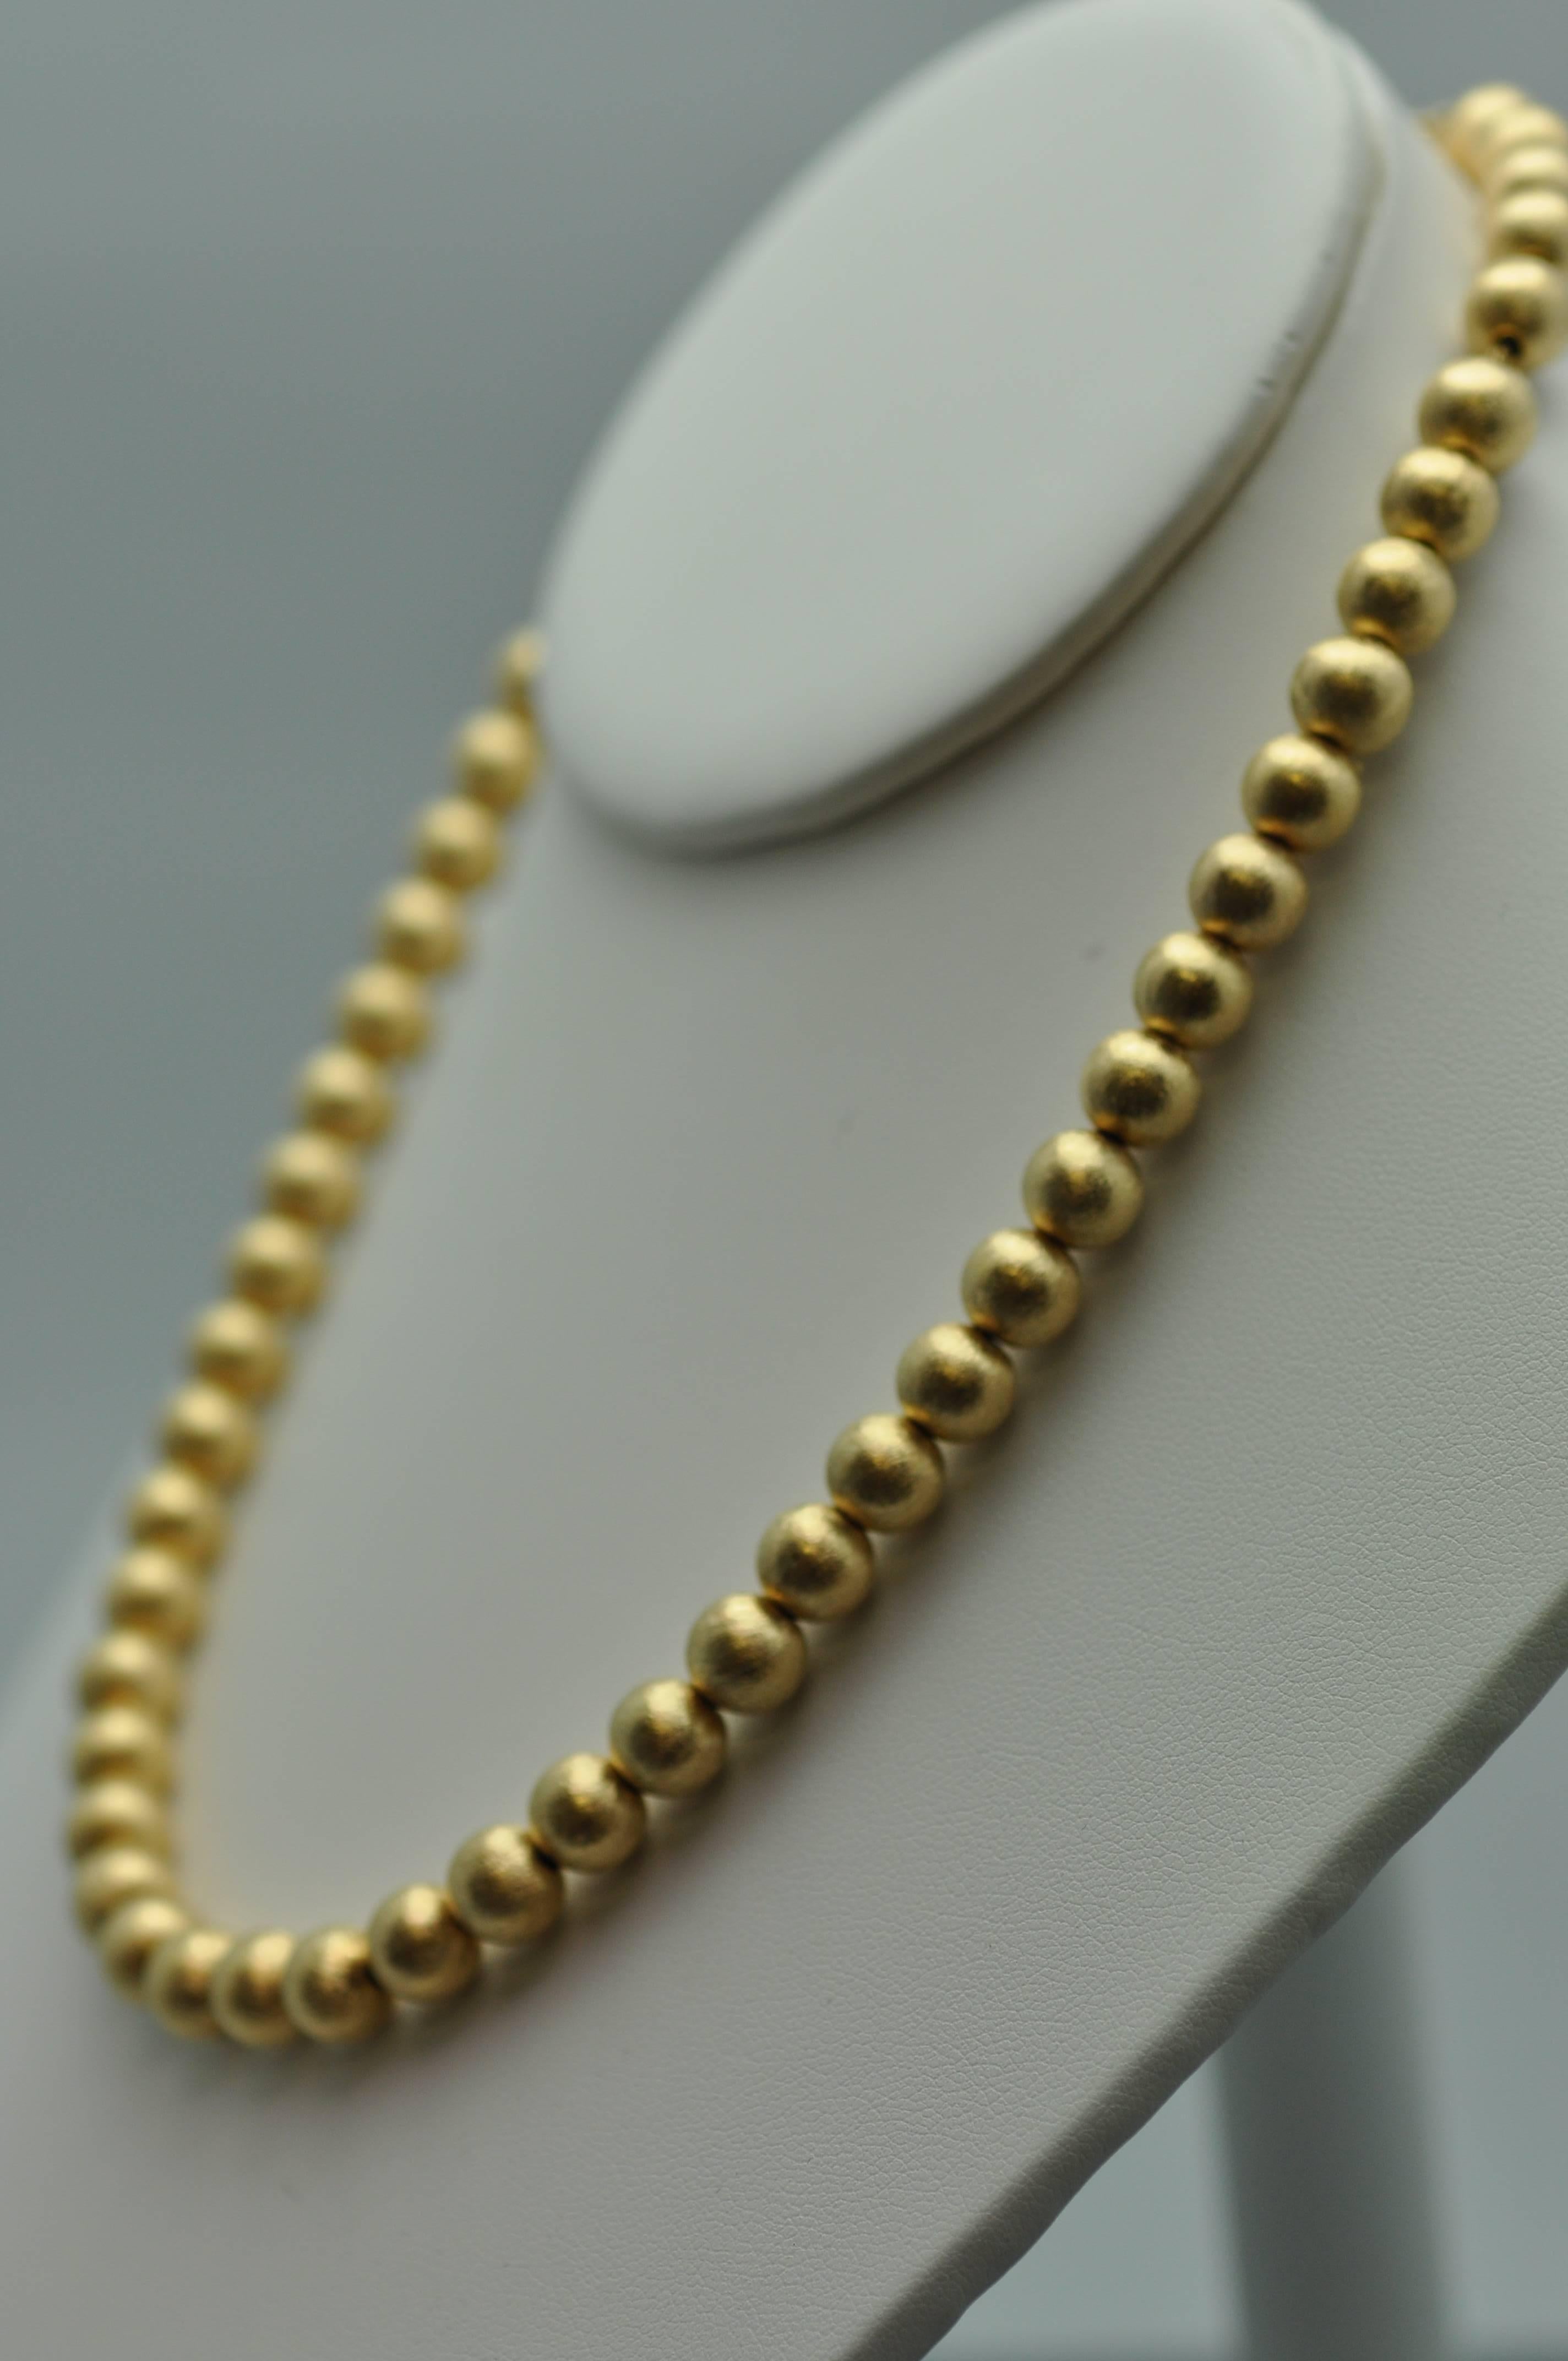 1950s Florentine Finish Gold Bead Necklace In Excellent Condition For Sale In Dallas, TX